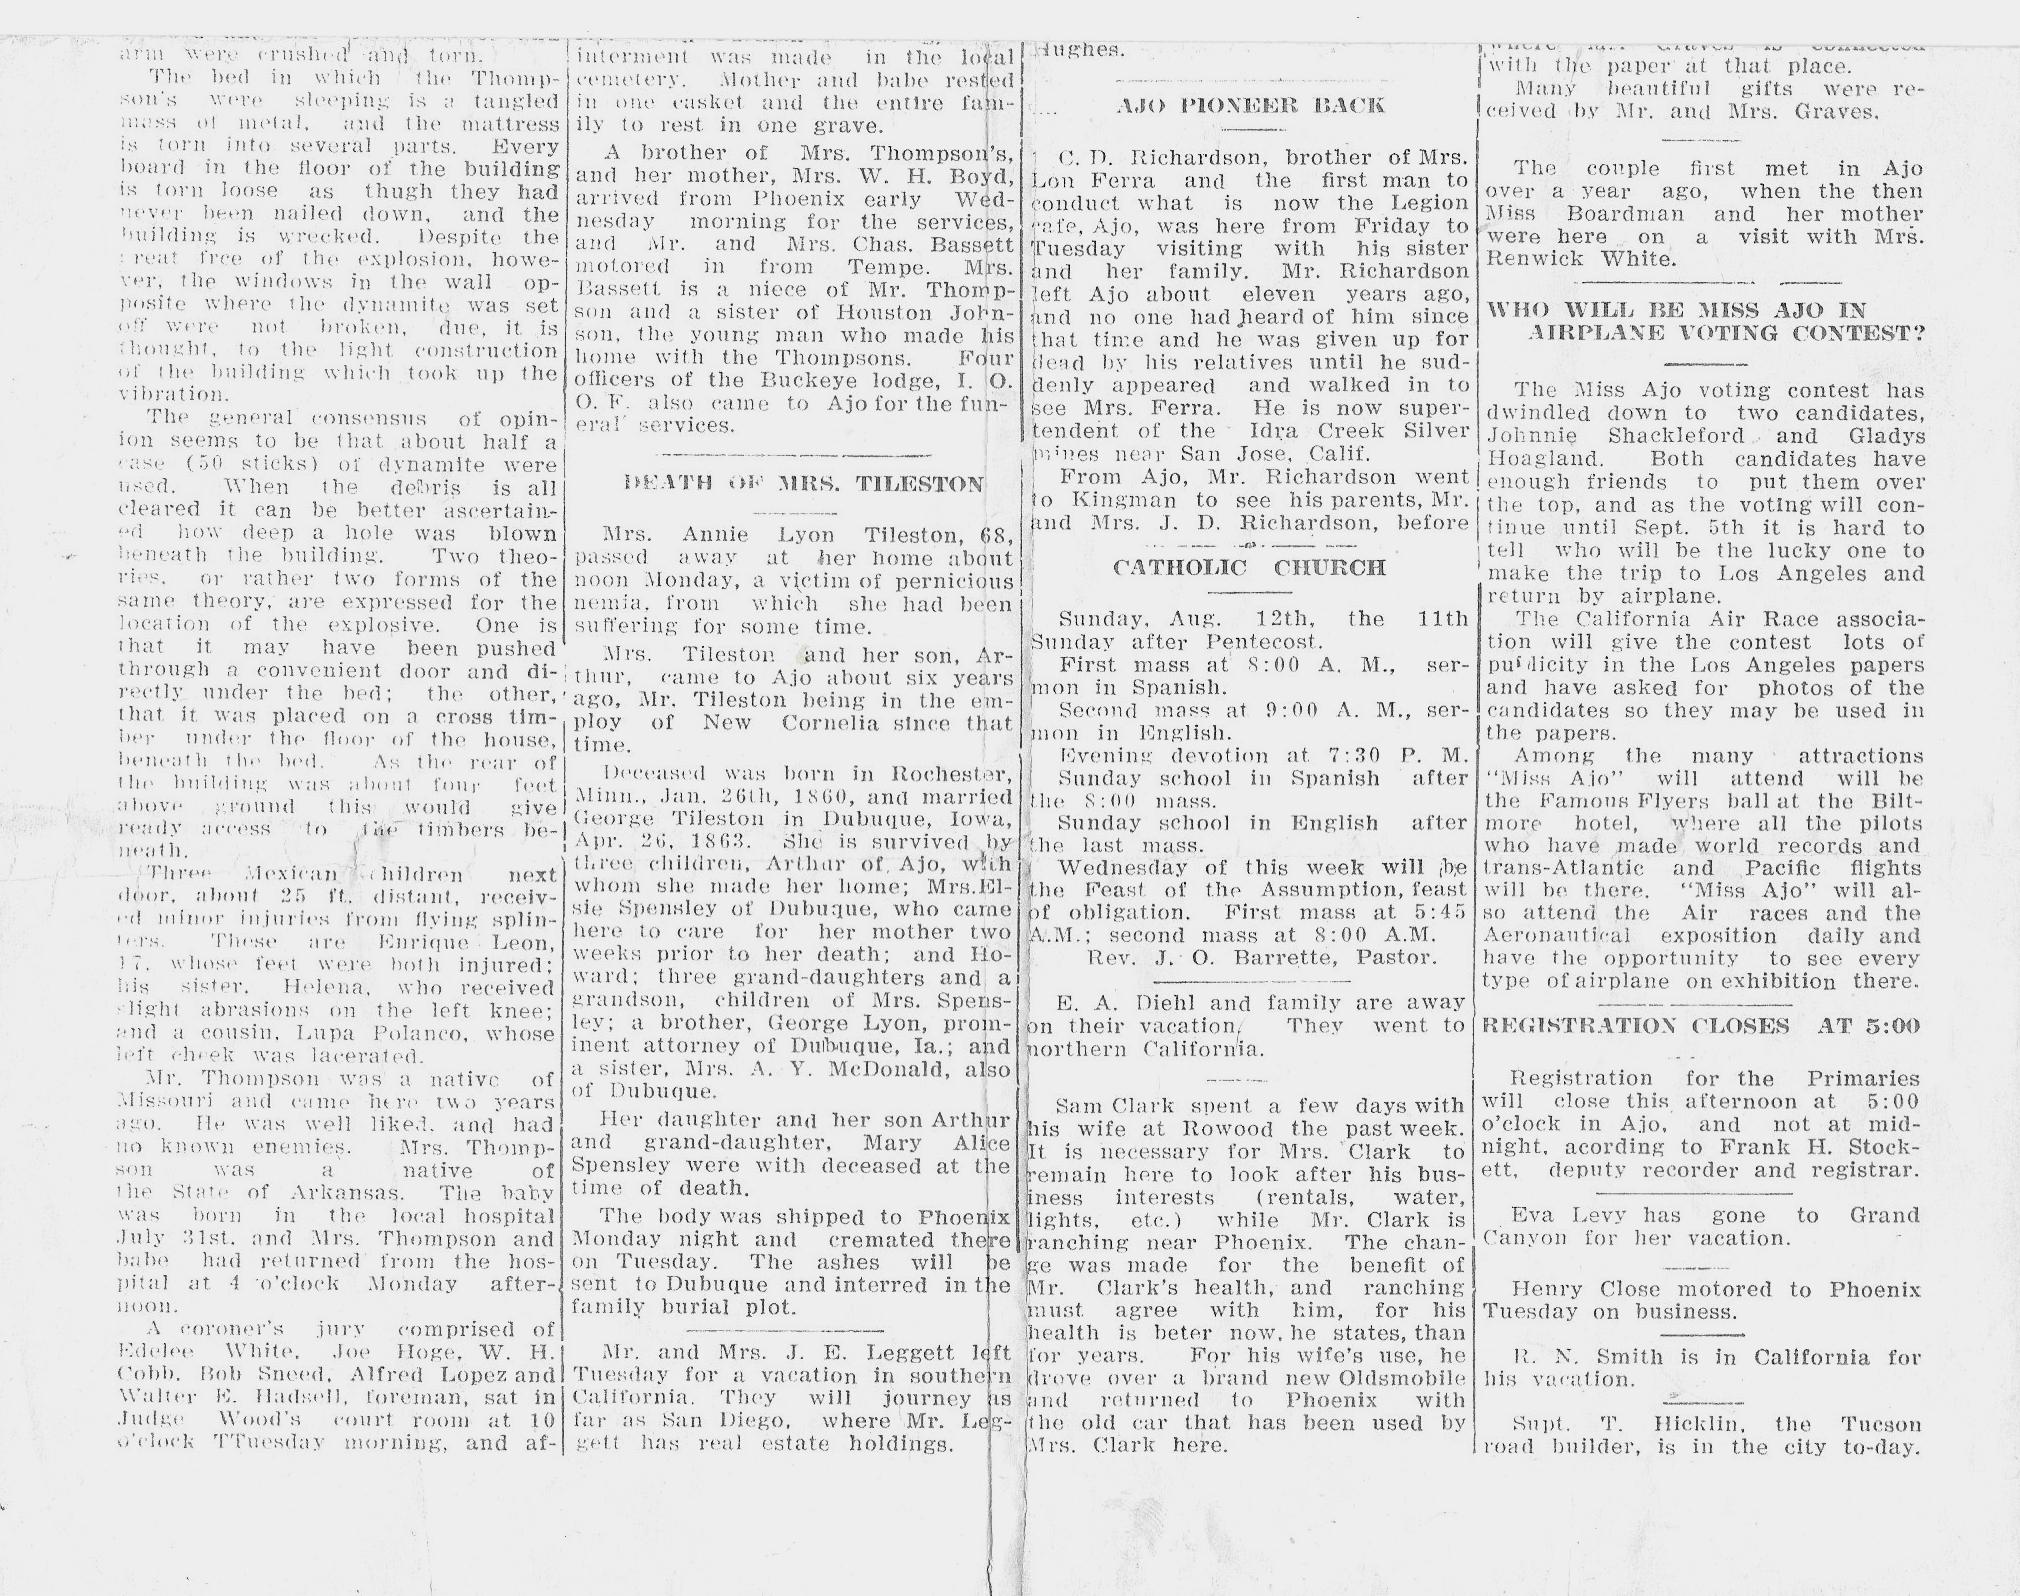 Article on the killing of the Thompson family by dynamite, part 2